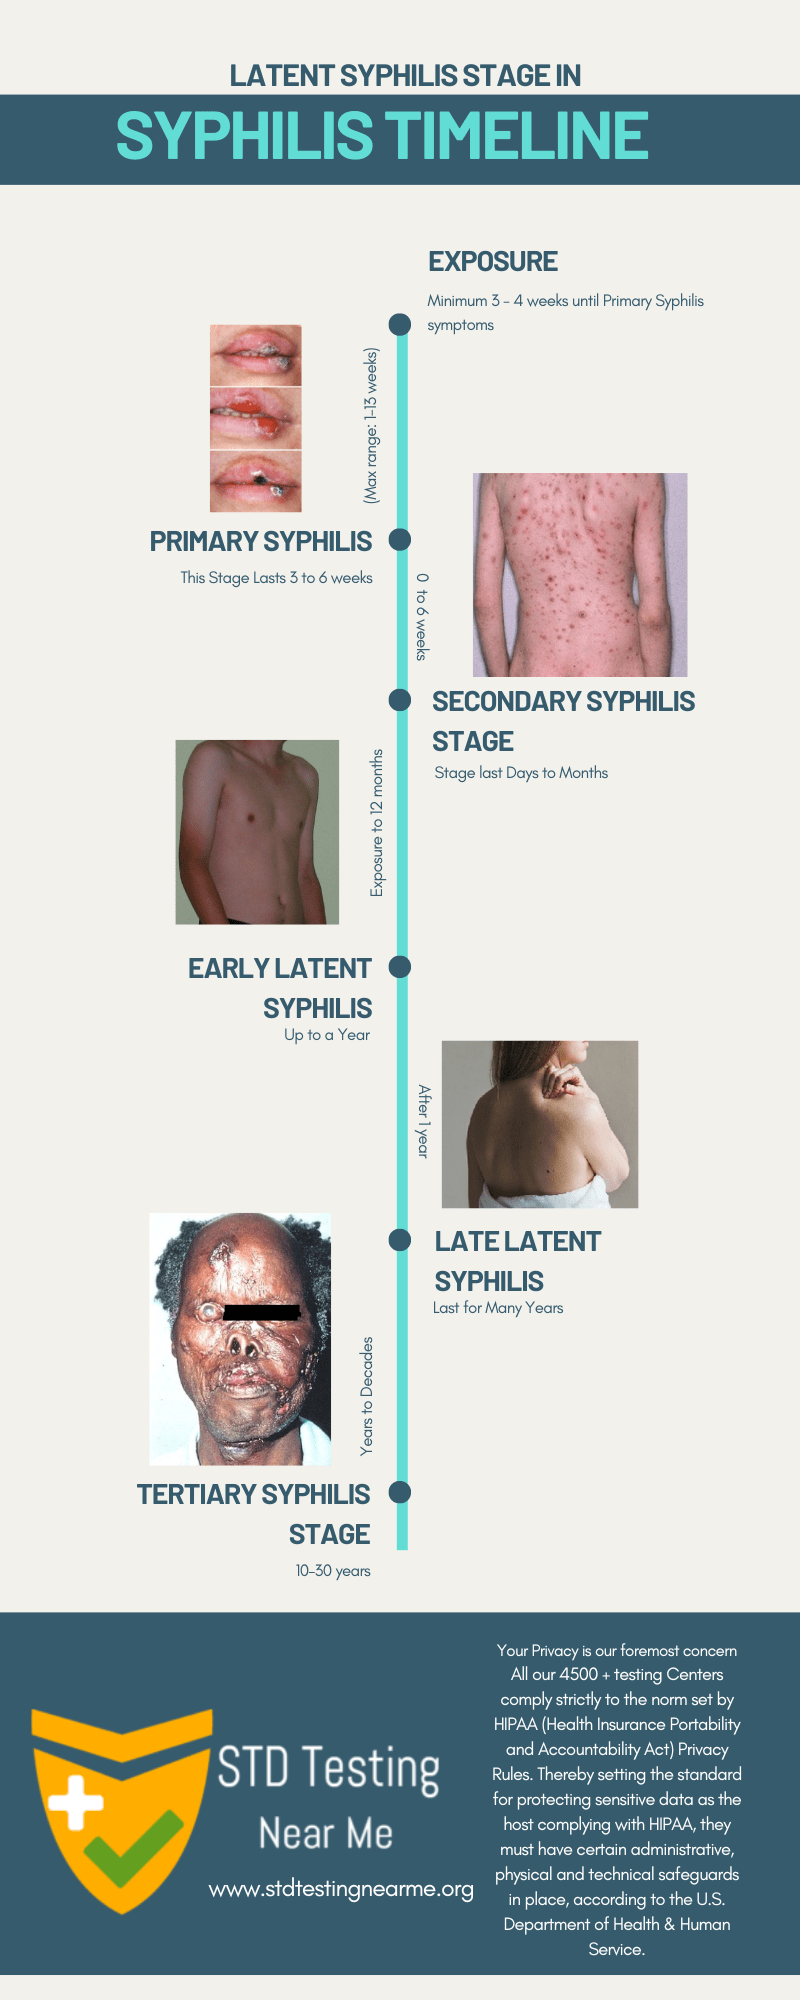 Early-latent-syphilis-timeline-infographic